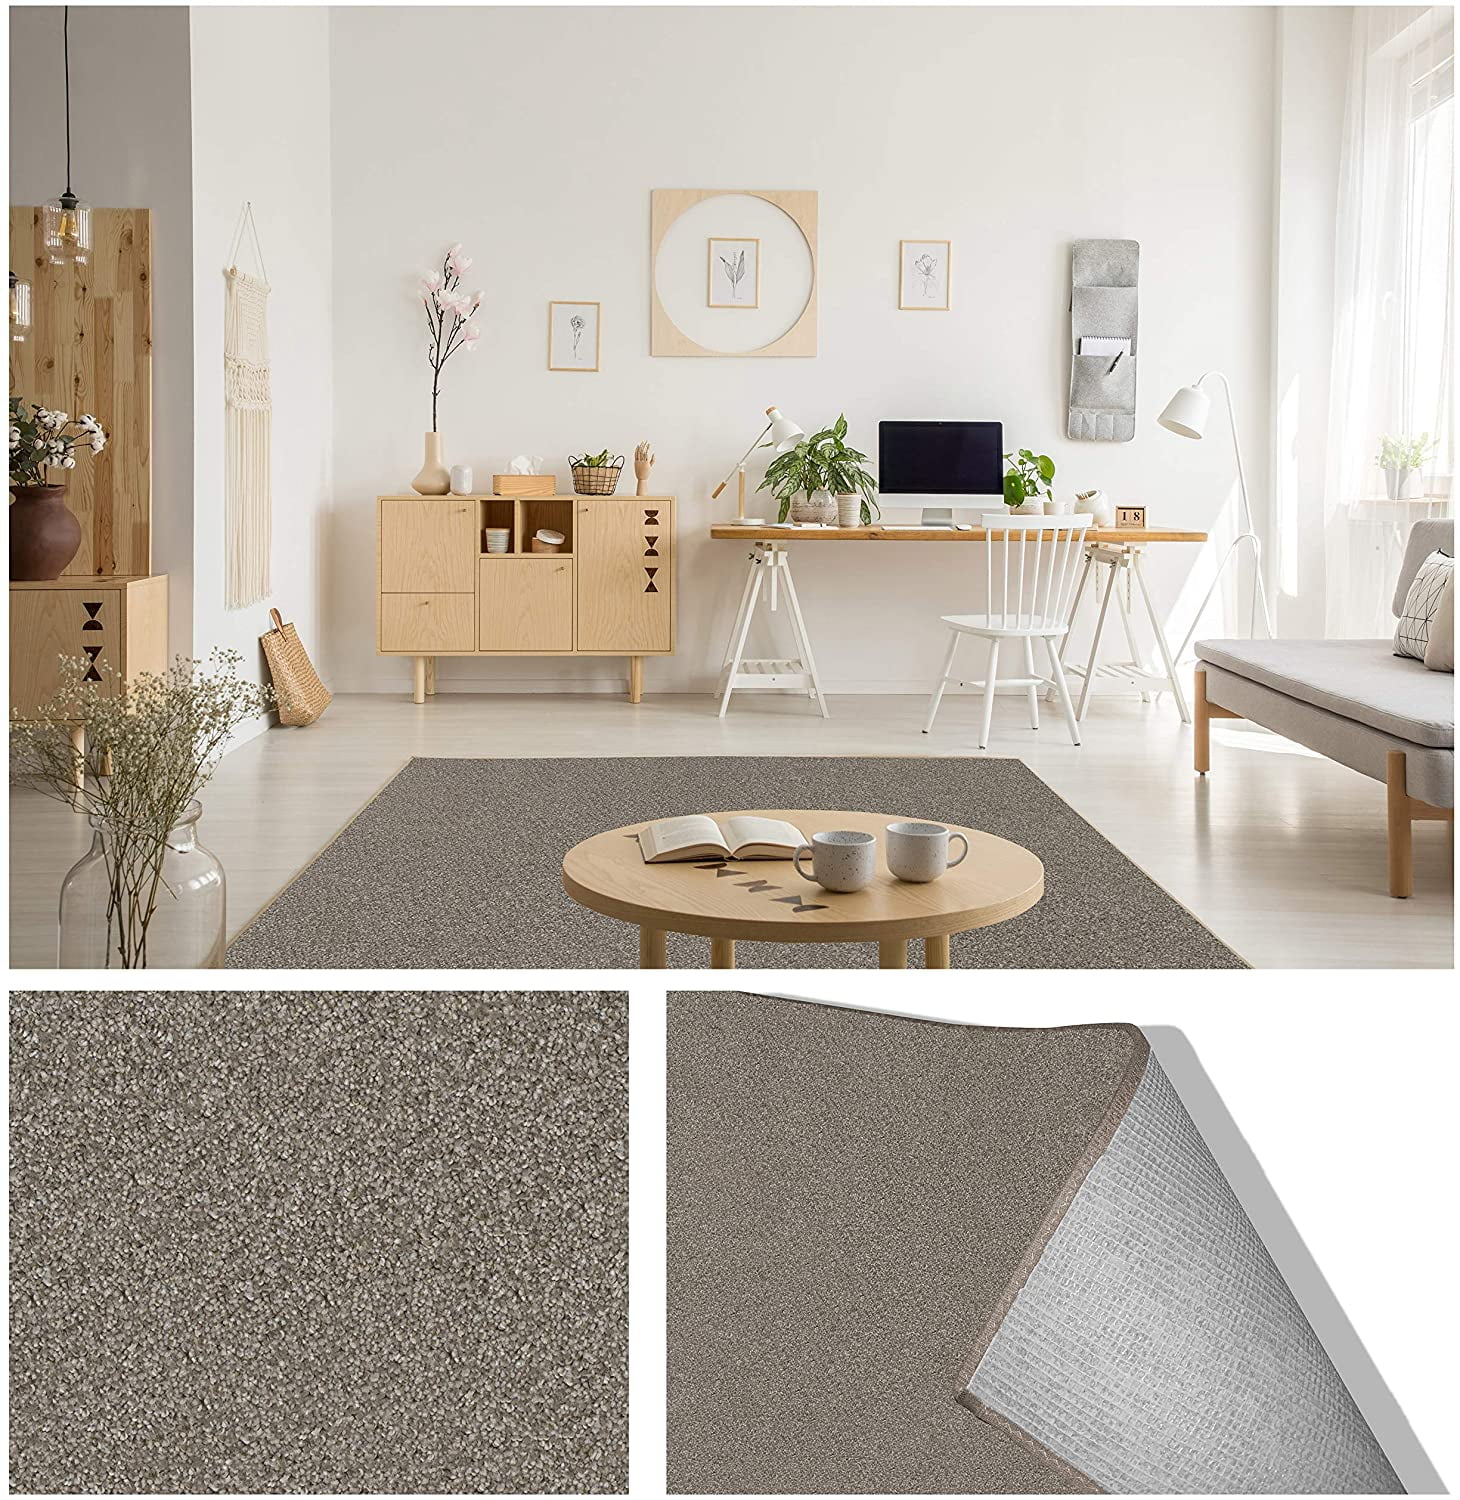 Details about  /  Original Faux-Chinchilla Area Rug Super Soft and Cozy Hi 2x3 Feet